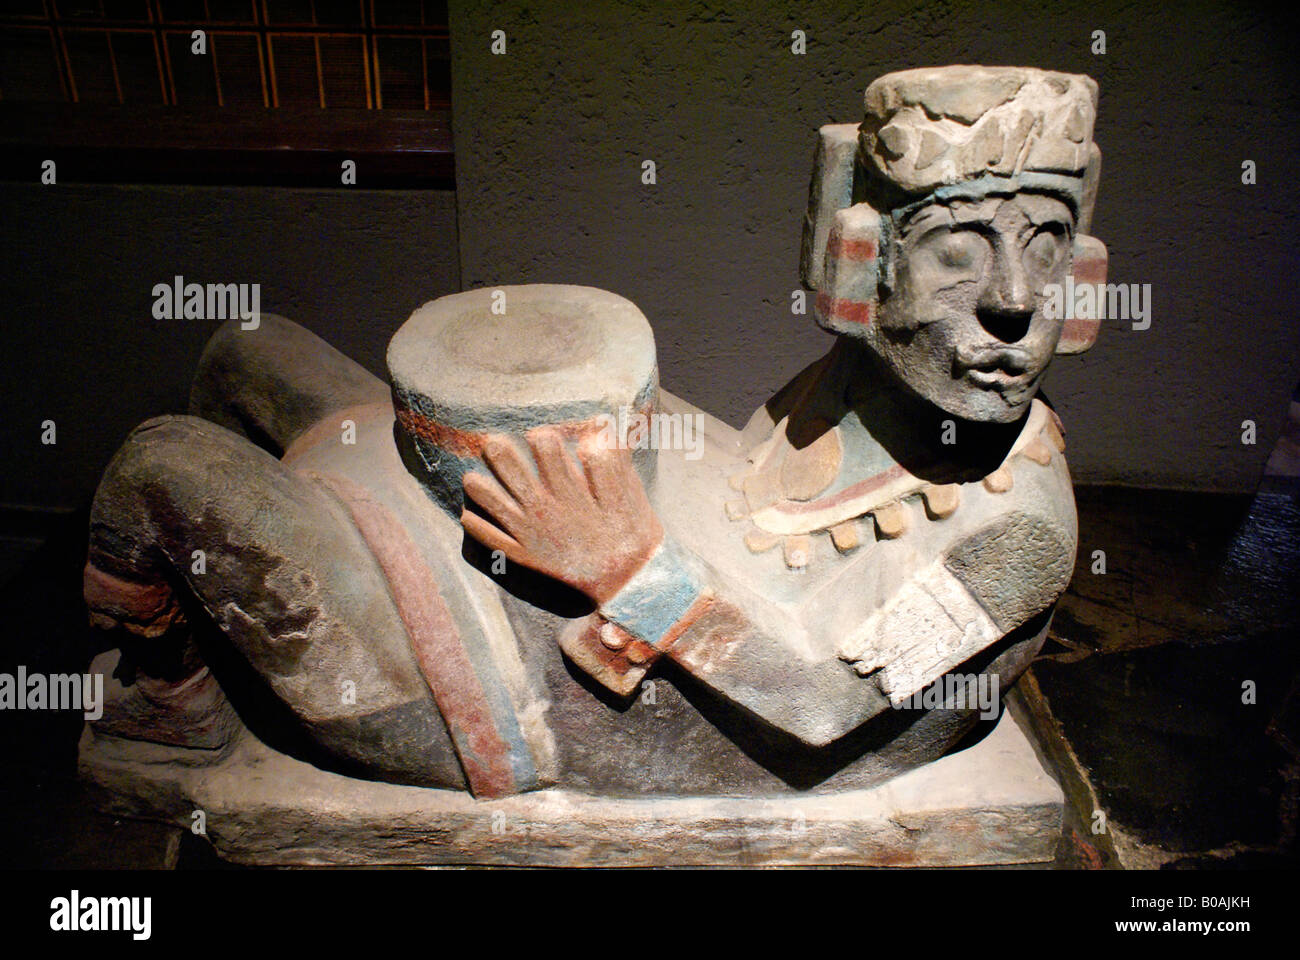 Polychrome Chac mool figure on display at the Museo del Templo Mayor, Mexico City Stock Photo